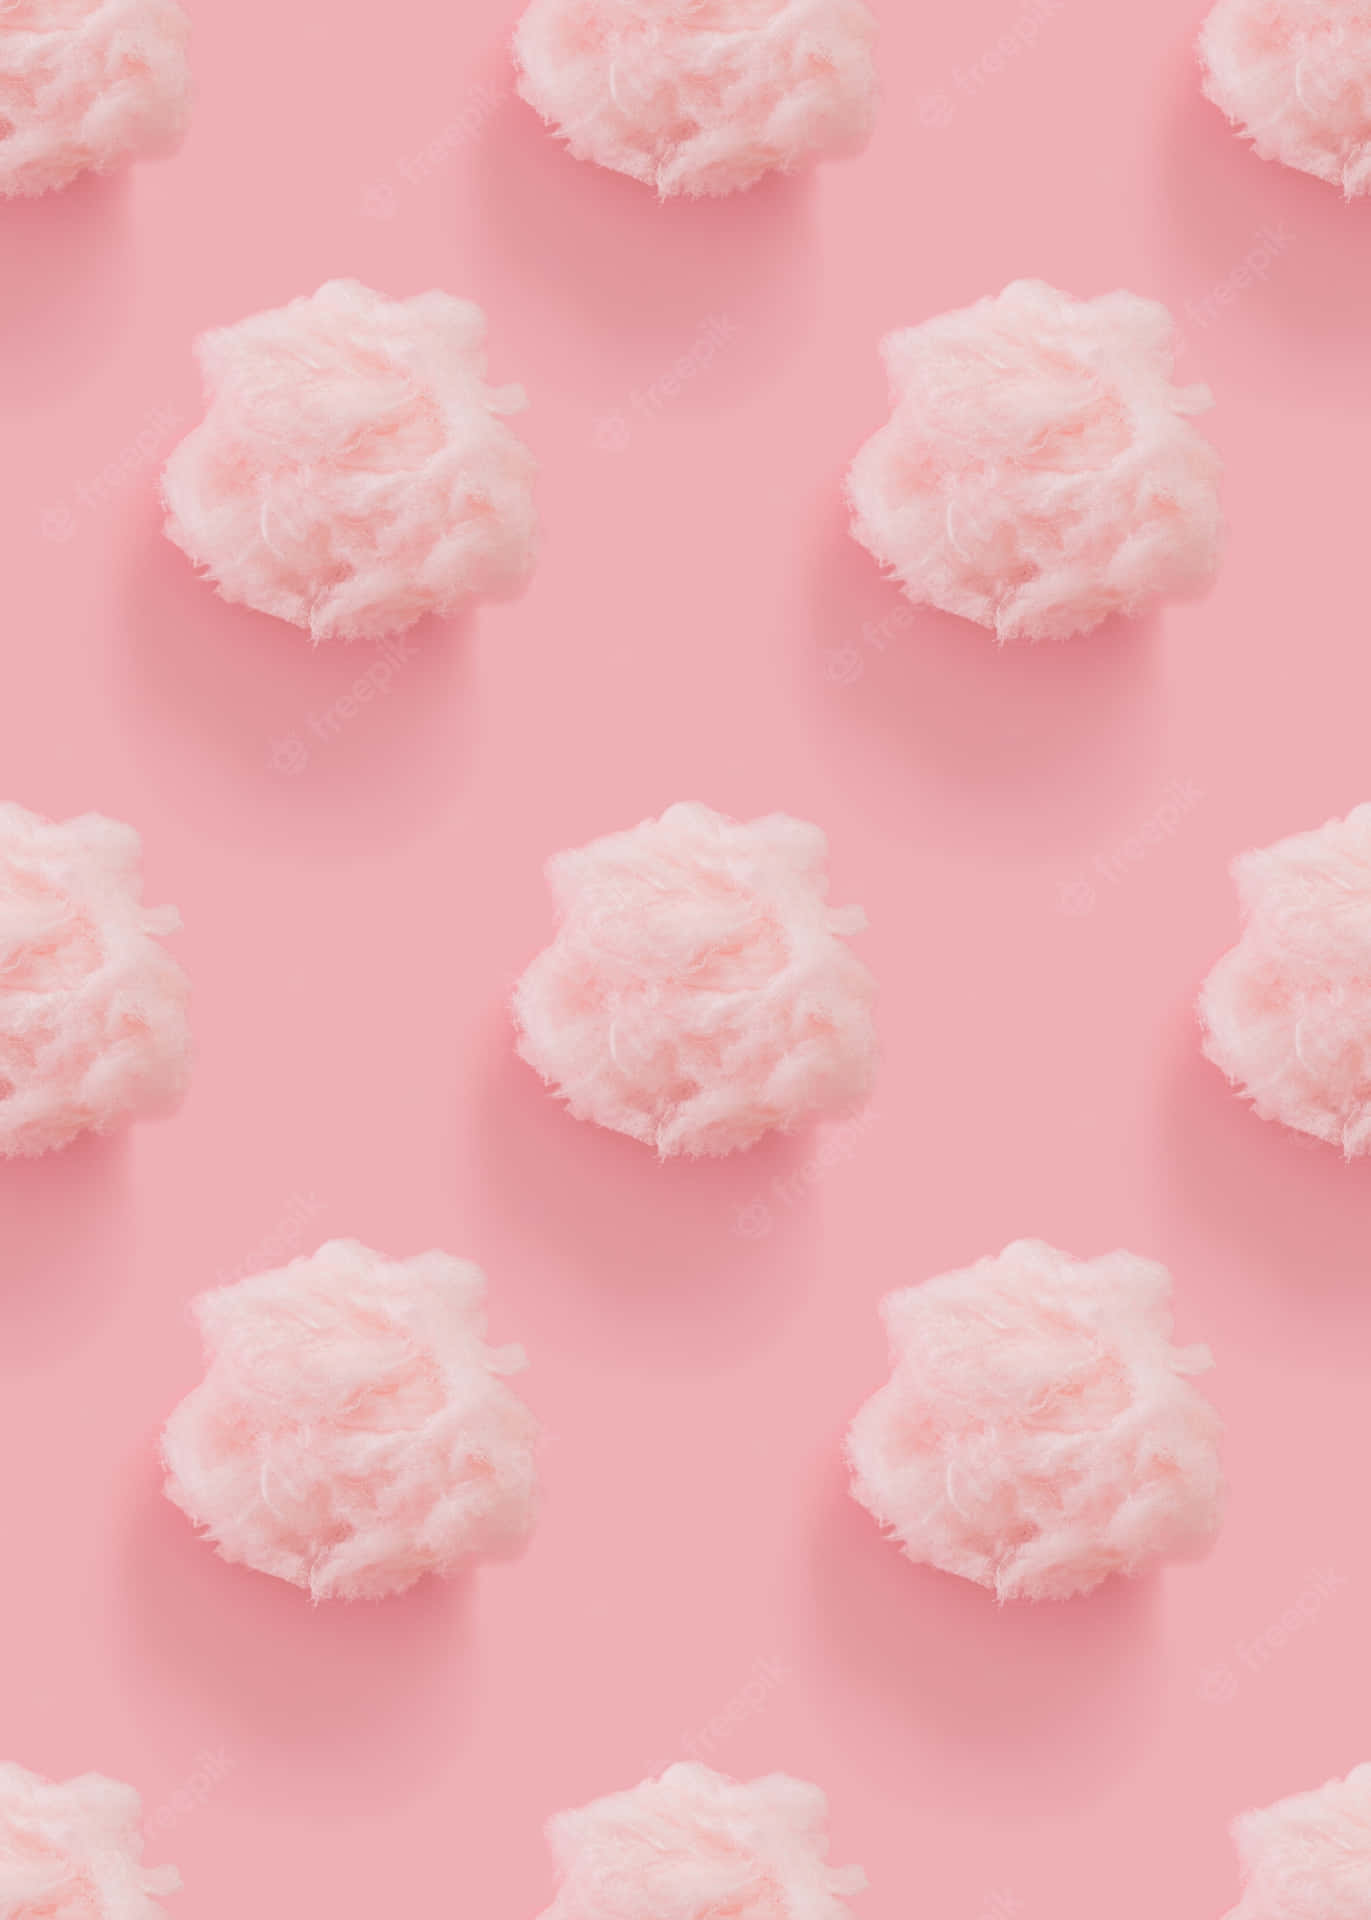 A Pink Background With White Clouds On It Wallpaper